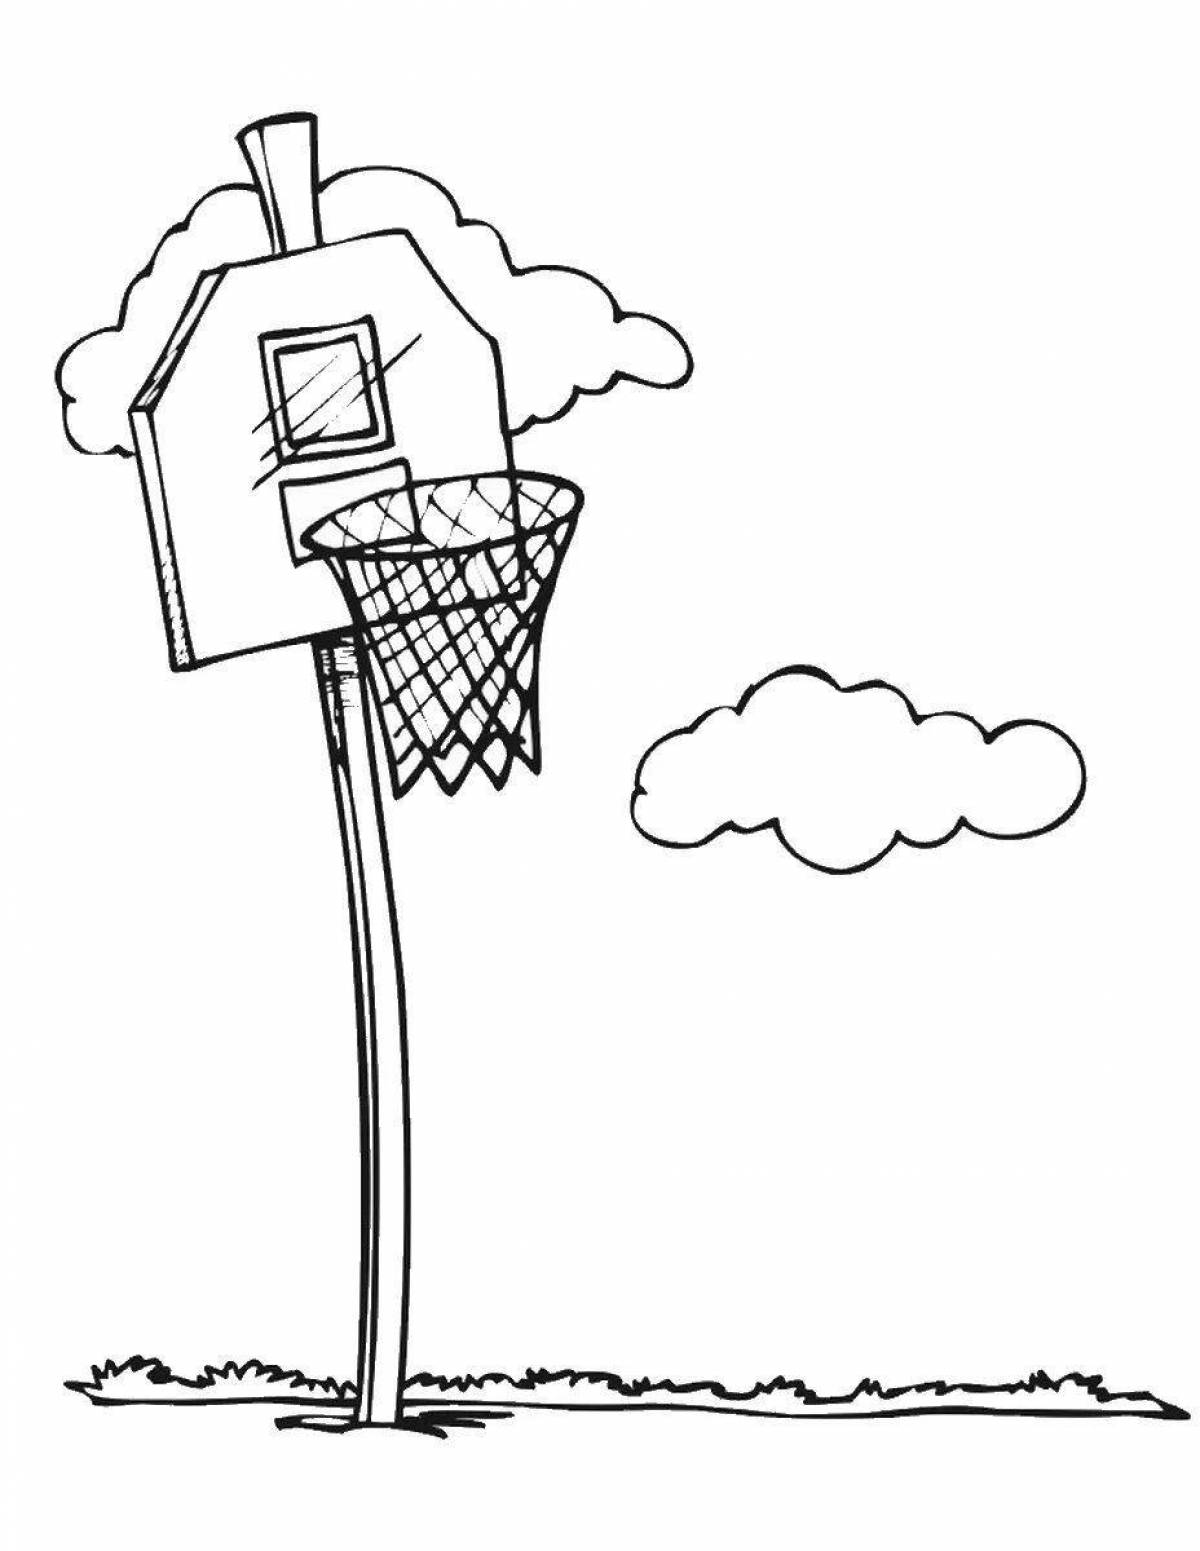 A fascinating basketball hoop coloring page